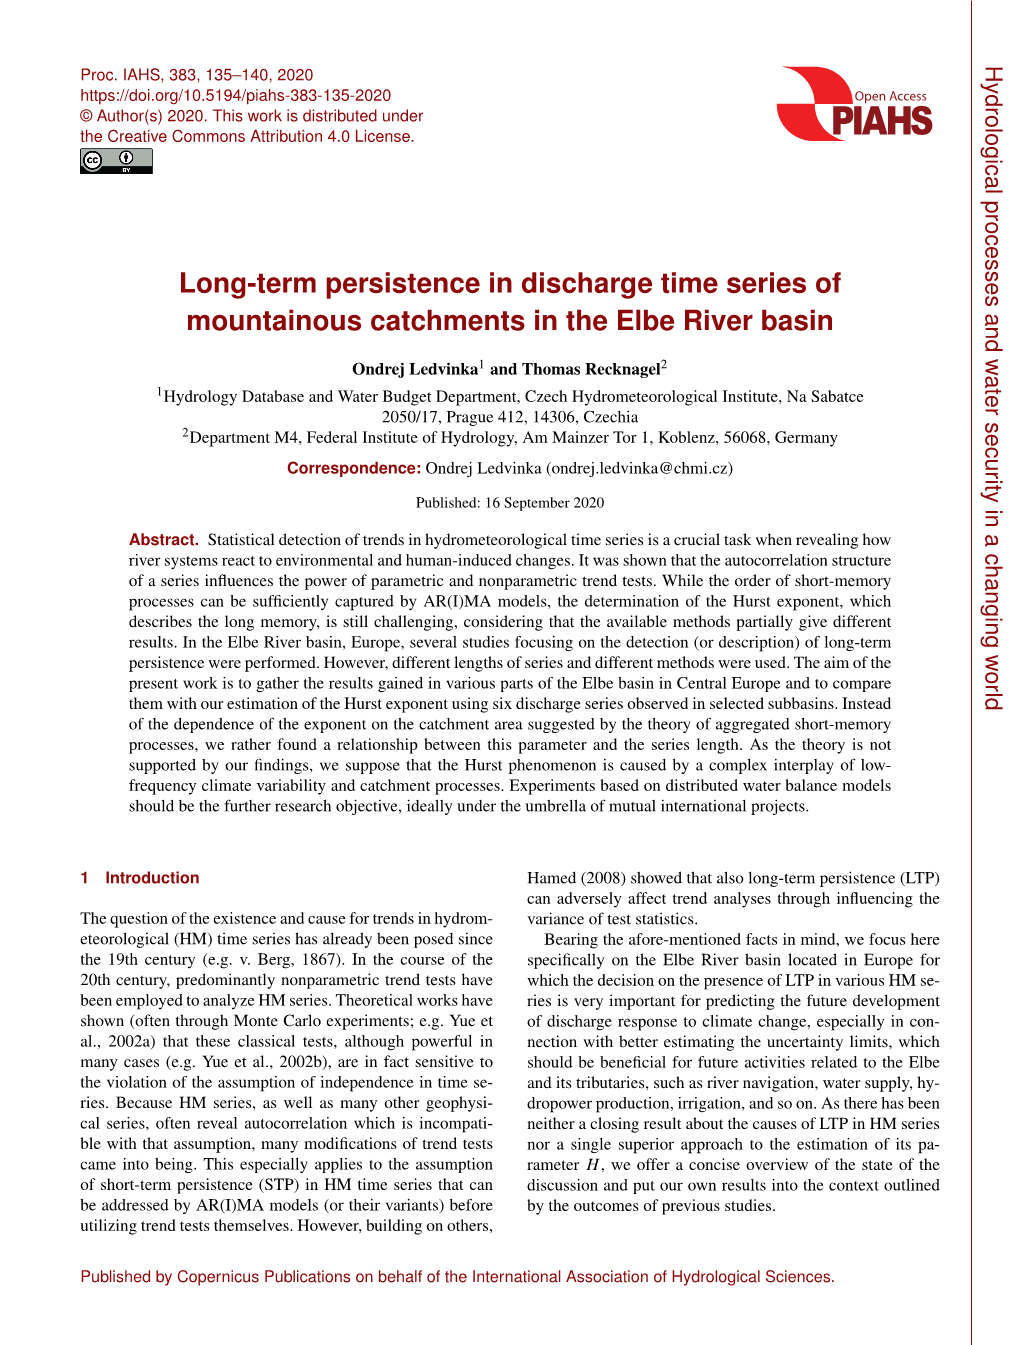 Long-Term Persistence in Discharge Time Series of Mountainous Catchments in the Elbe River Basin